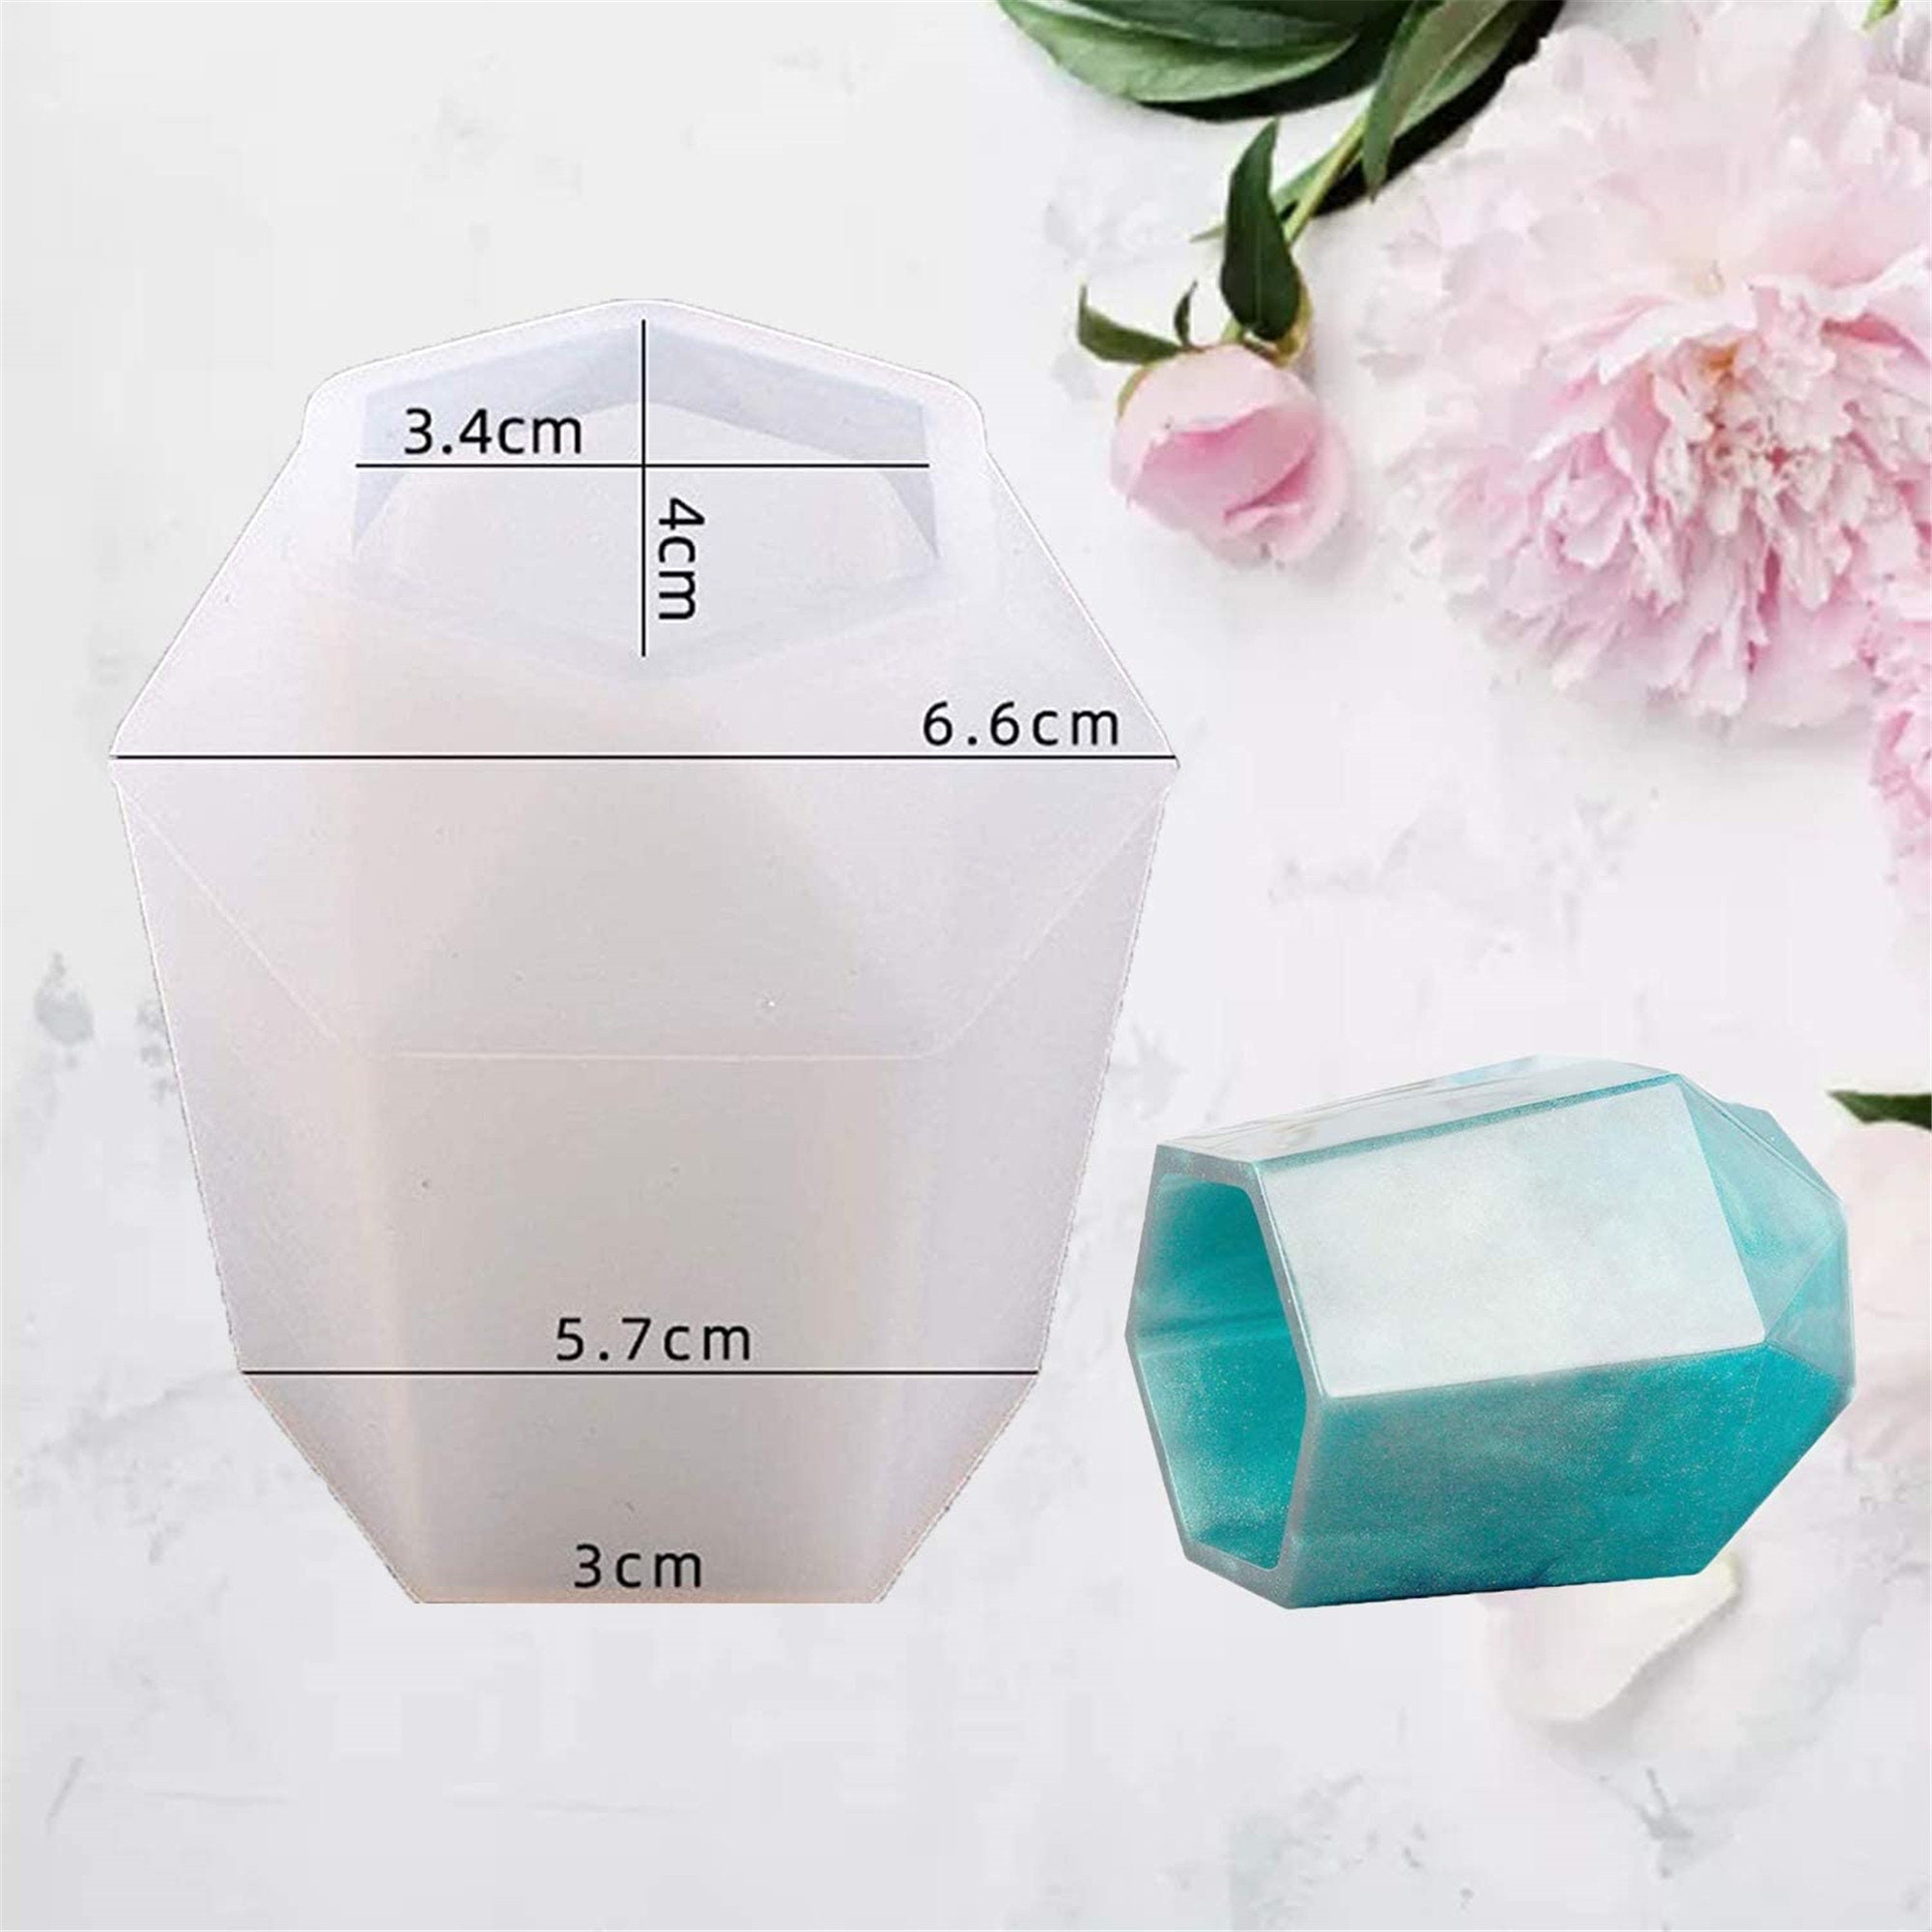 3 Pcs Cup Resin Silicone Mold, Kalolary Makeup Brush Holder Organizer  Cylinder Craft Epoxy Mold, DIY Flower Planter Pot Molds, Cup Mold, Pen  Holder